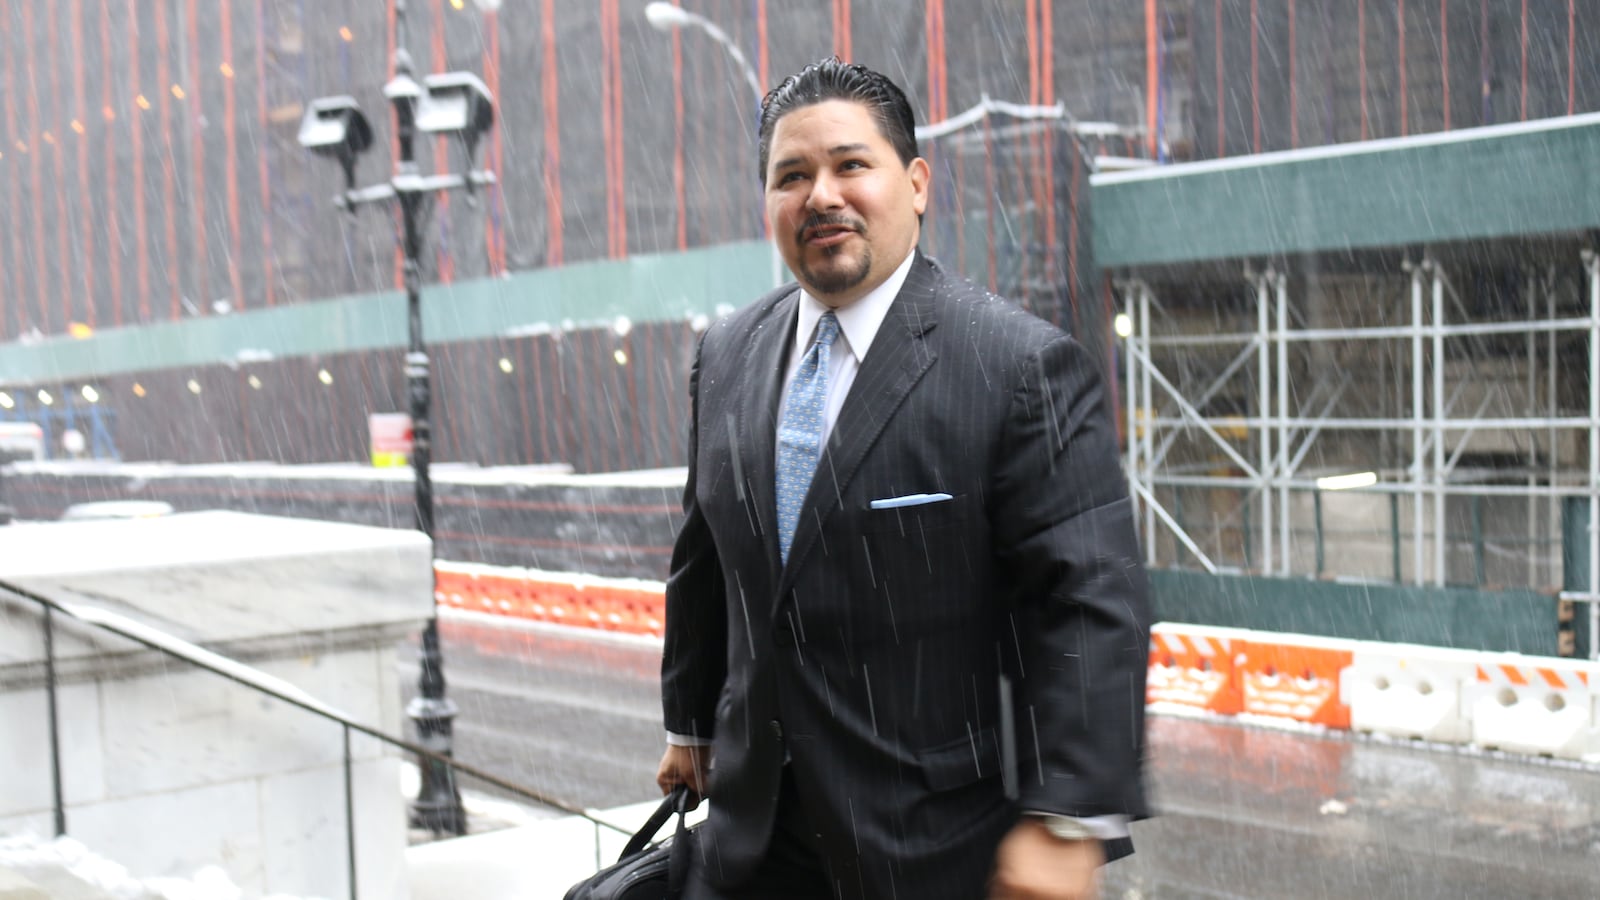 Richard Carranza climbed the steps of Tweed Courthouse, the education department headquarters, on his first day as chancellor.